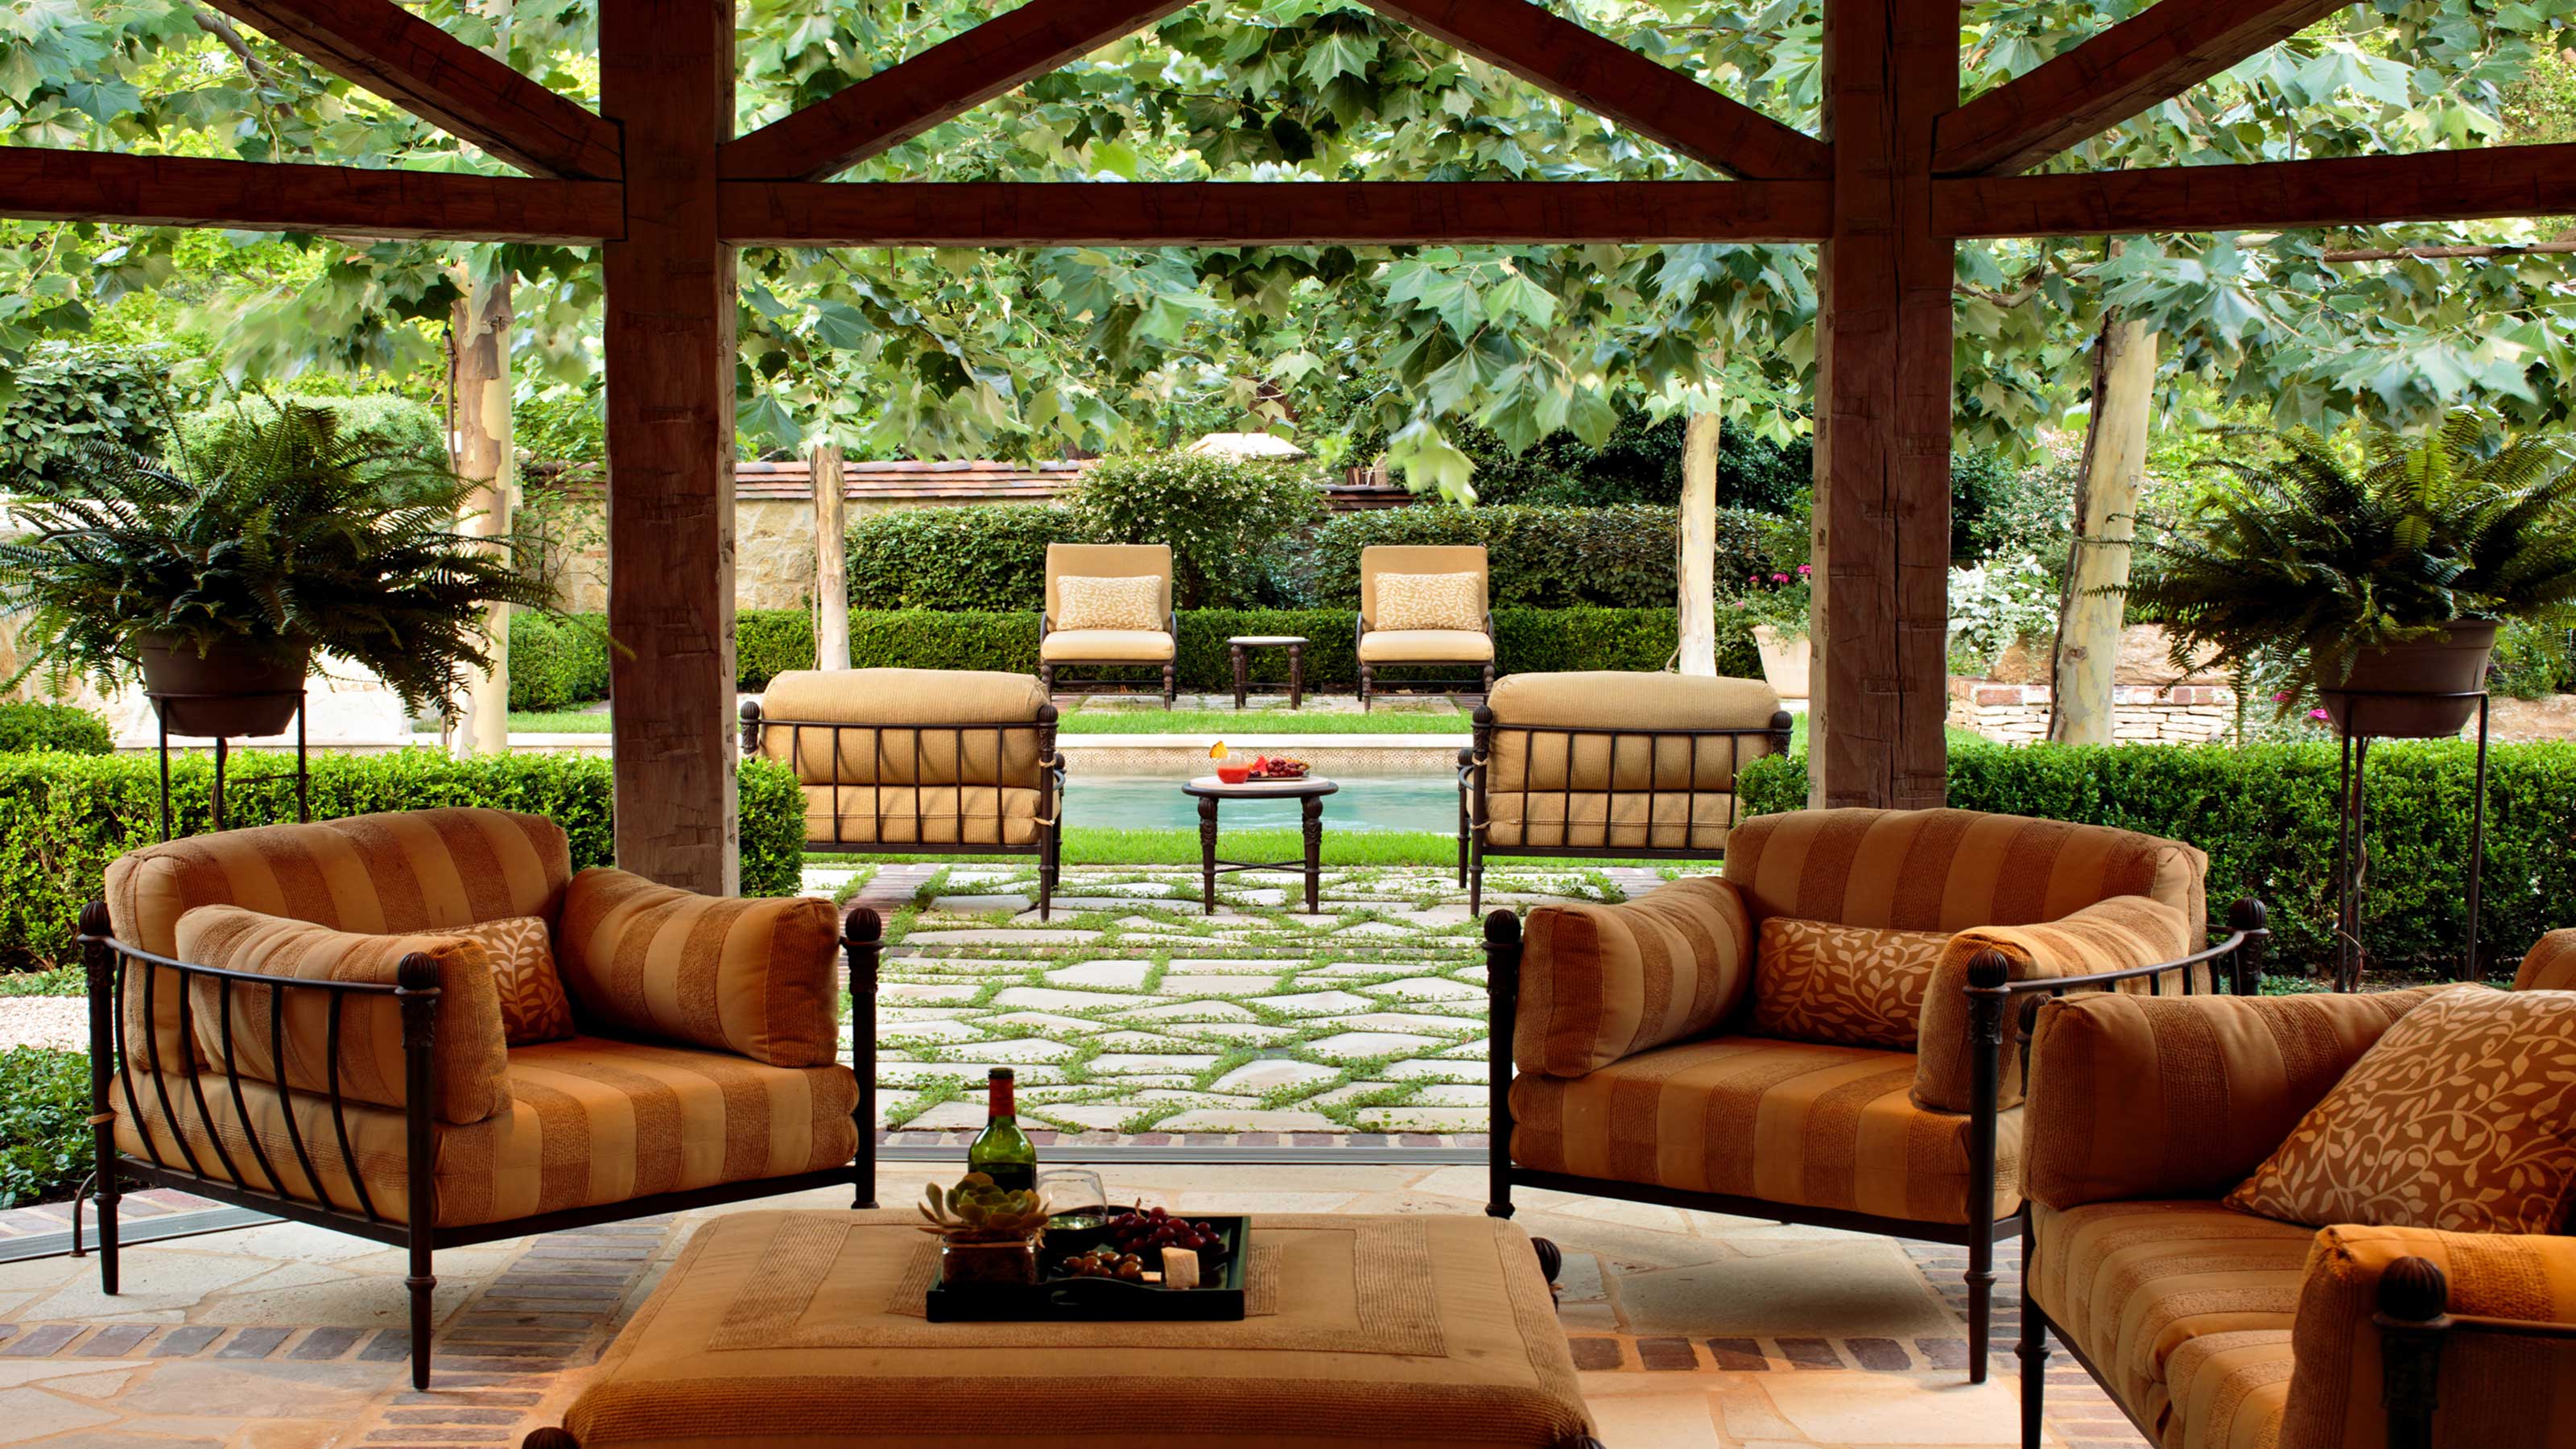 Backyard Ideas With Pavers: 10 Smart Ways To Elevate Your Patios And Paths  | Gardeningetc